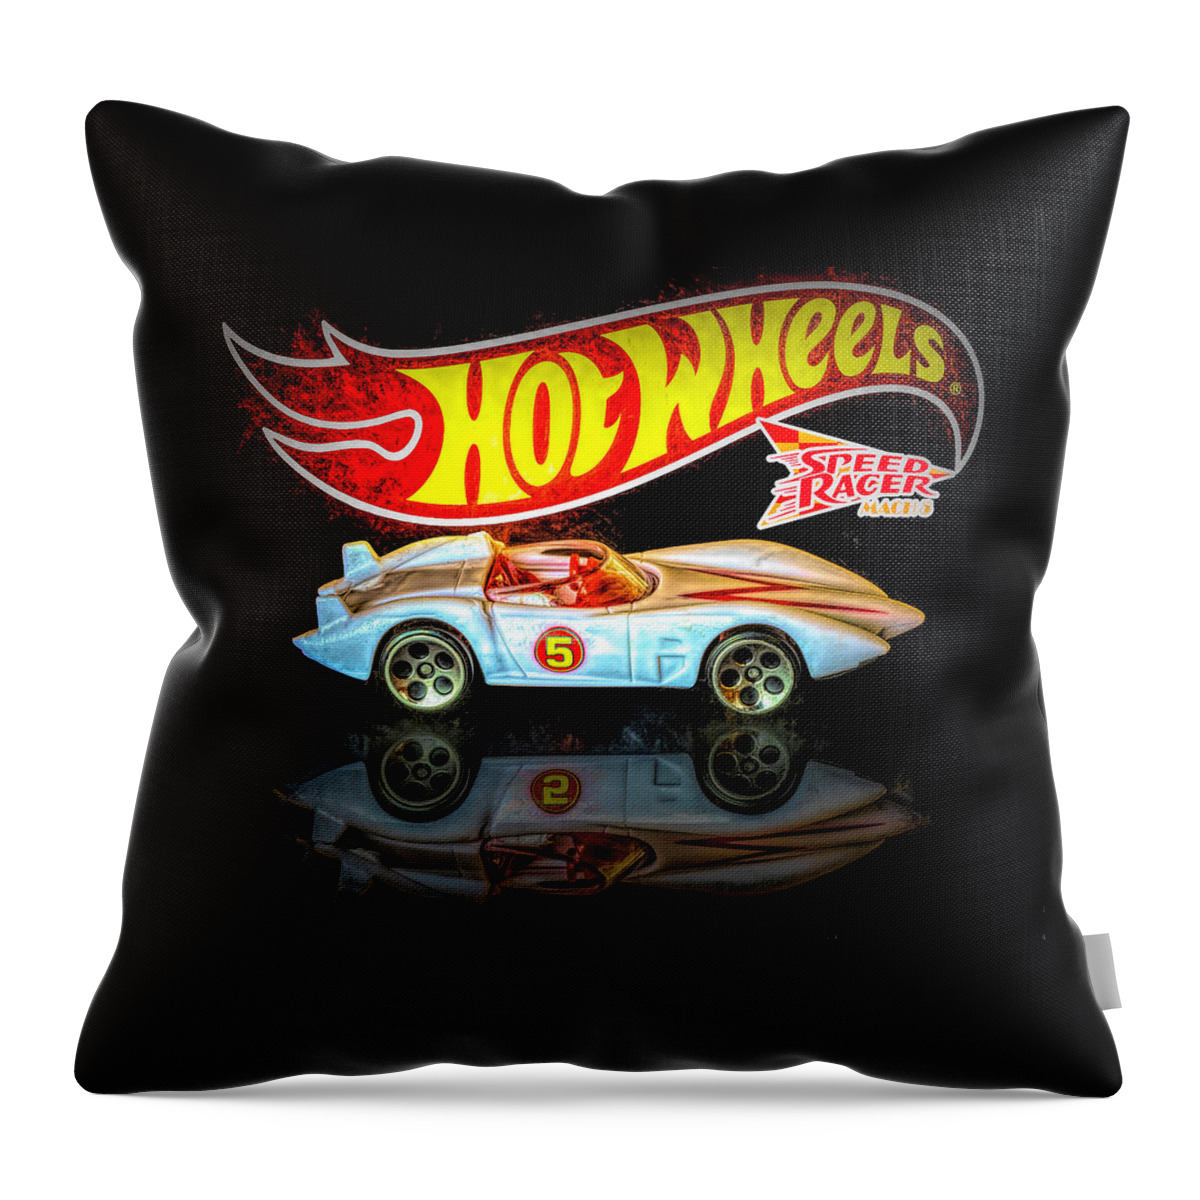  Hot Wheels Throw Pillow featuring the photograph Hot Wheels Speed Racer Mach 5 2 by James Sage